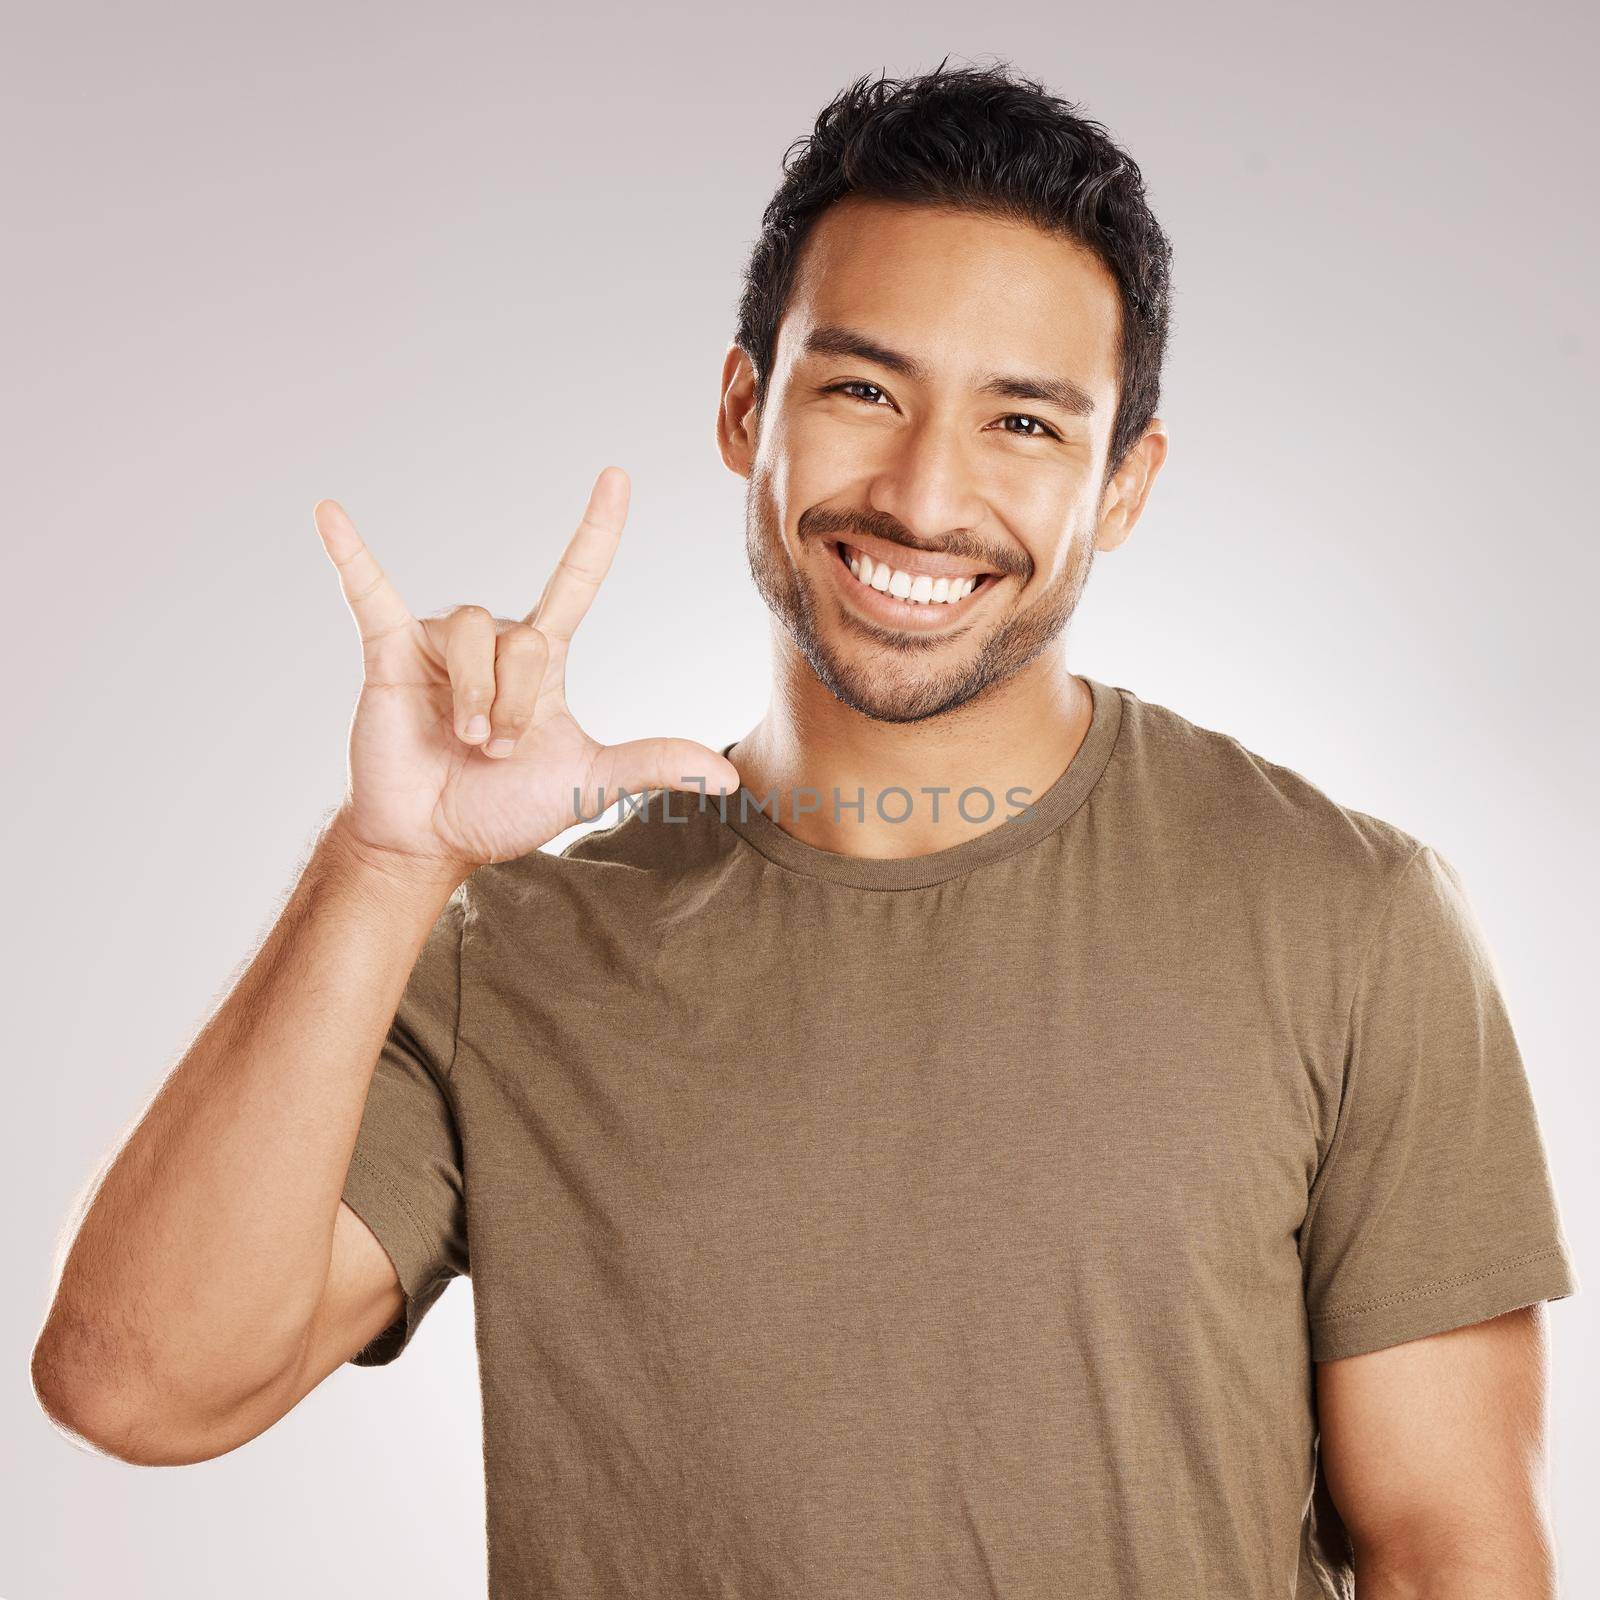 Handsome young mixed race man gesturing rock on while standing in studio isolated against a grey background. Hispanic male showing the sign language of I love you to show affection or romance by YuriArcurs